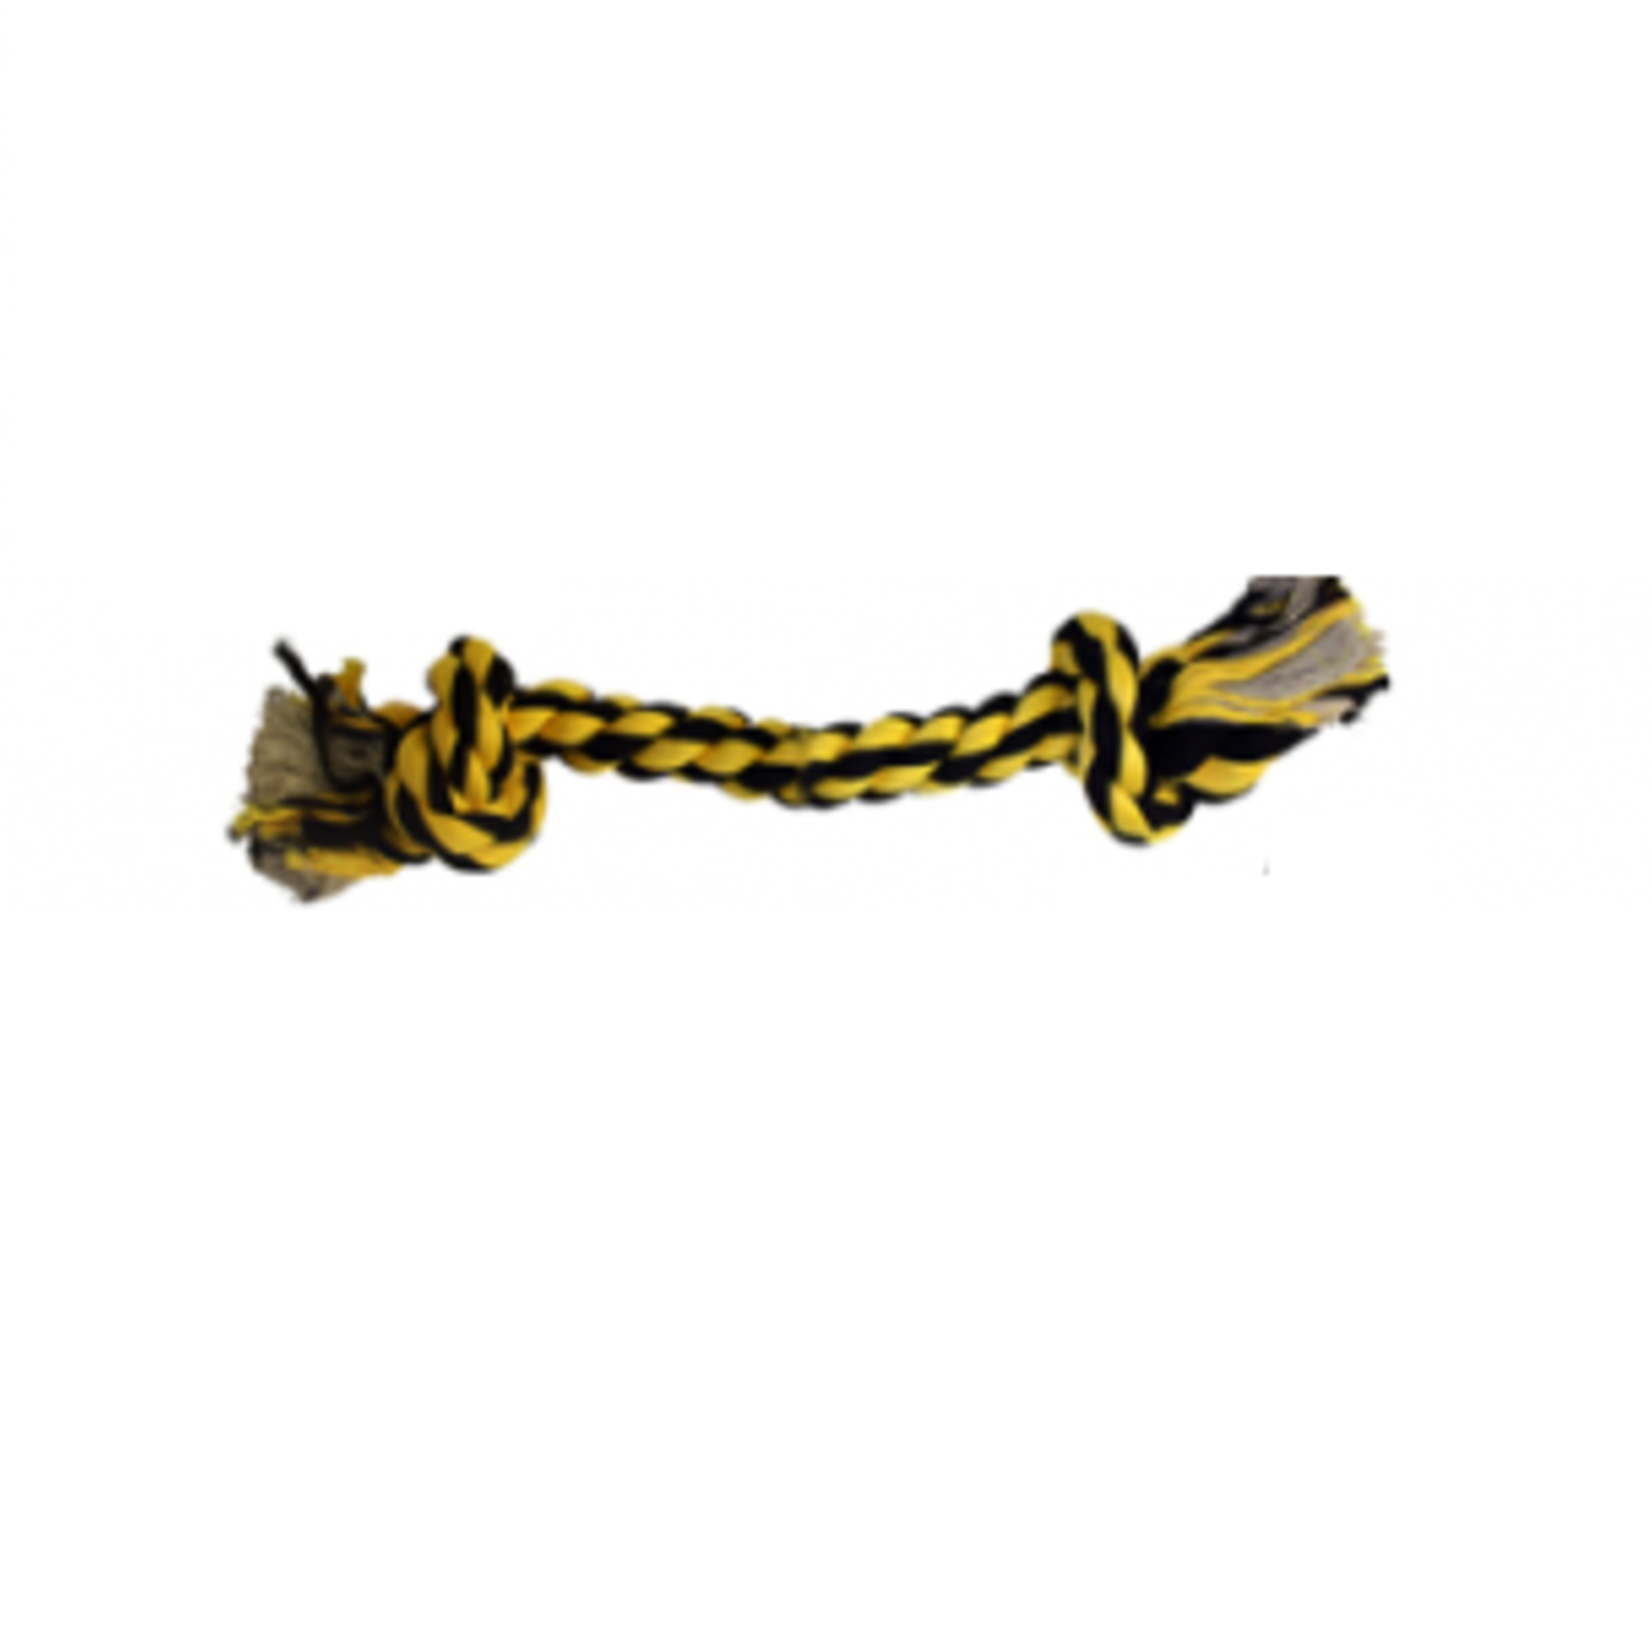 MultiPet Nuts for Knots - 2 Knot Rope